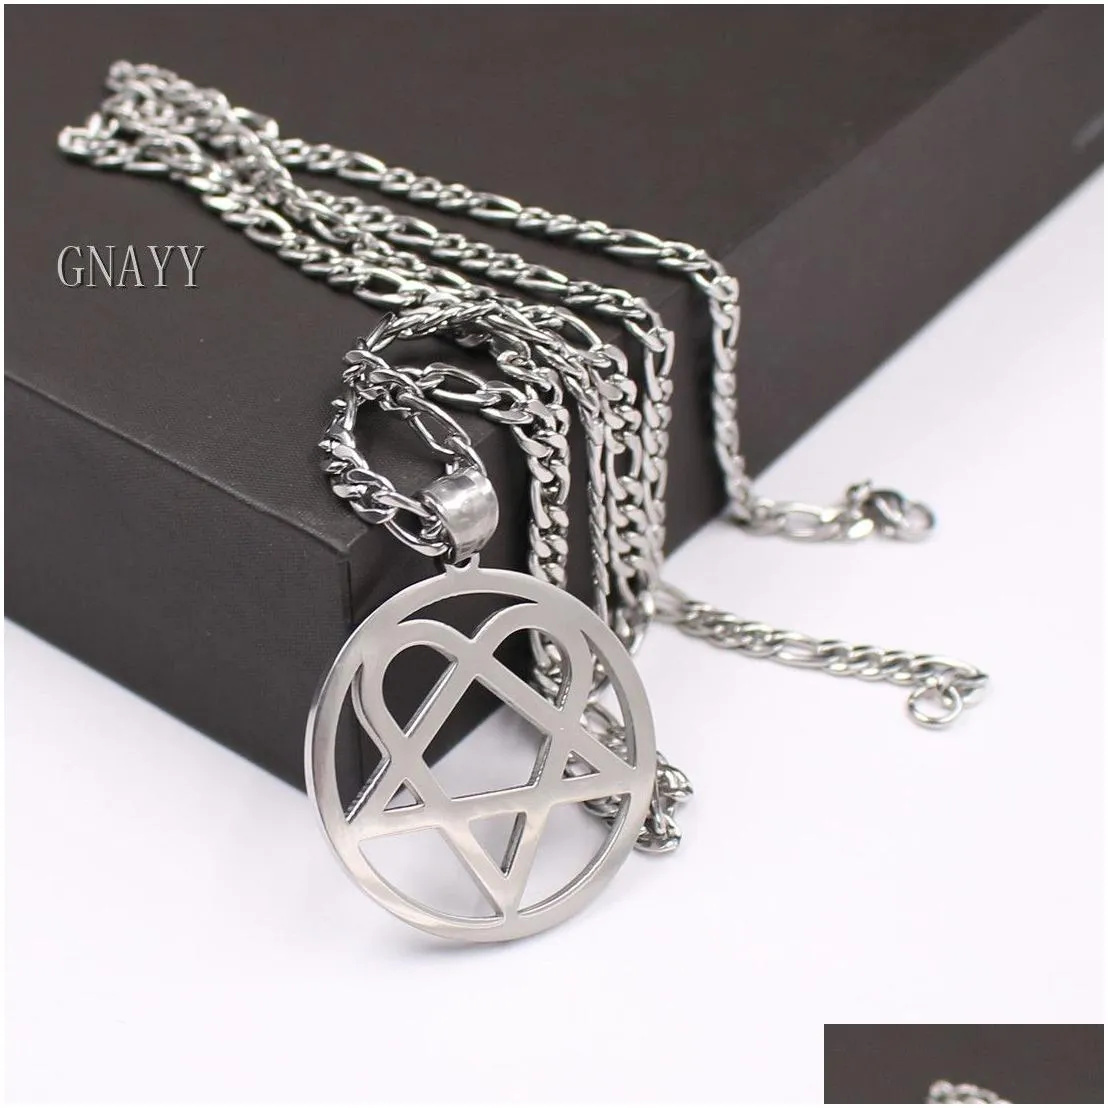 Punk jewelry Him Necklace Stainless Steel Heartagram Pendant Merch Logo Symbol Silver 4mm 24 curb Chain252o